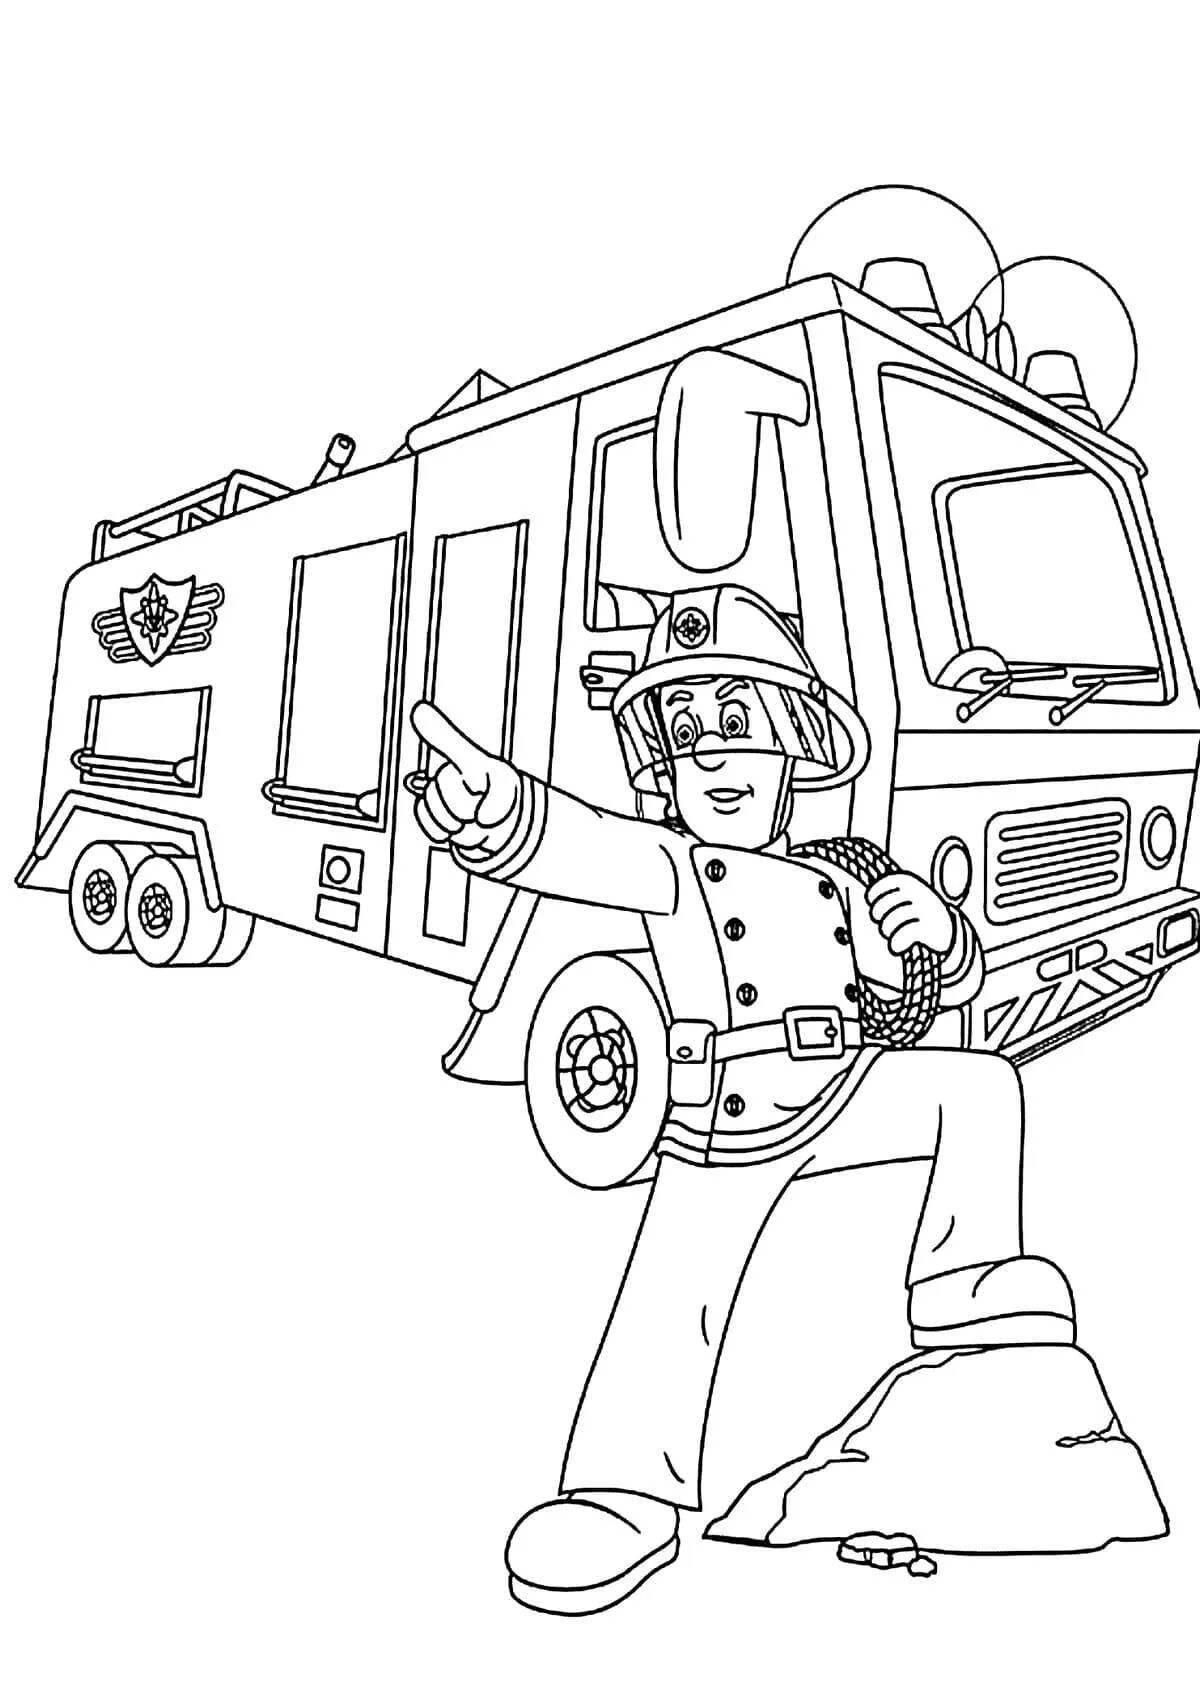 Coloring book the wonderful profession of a firefighter